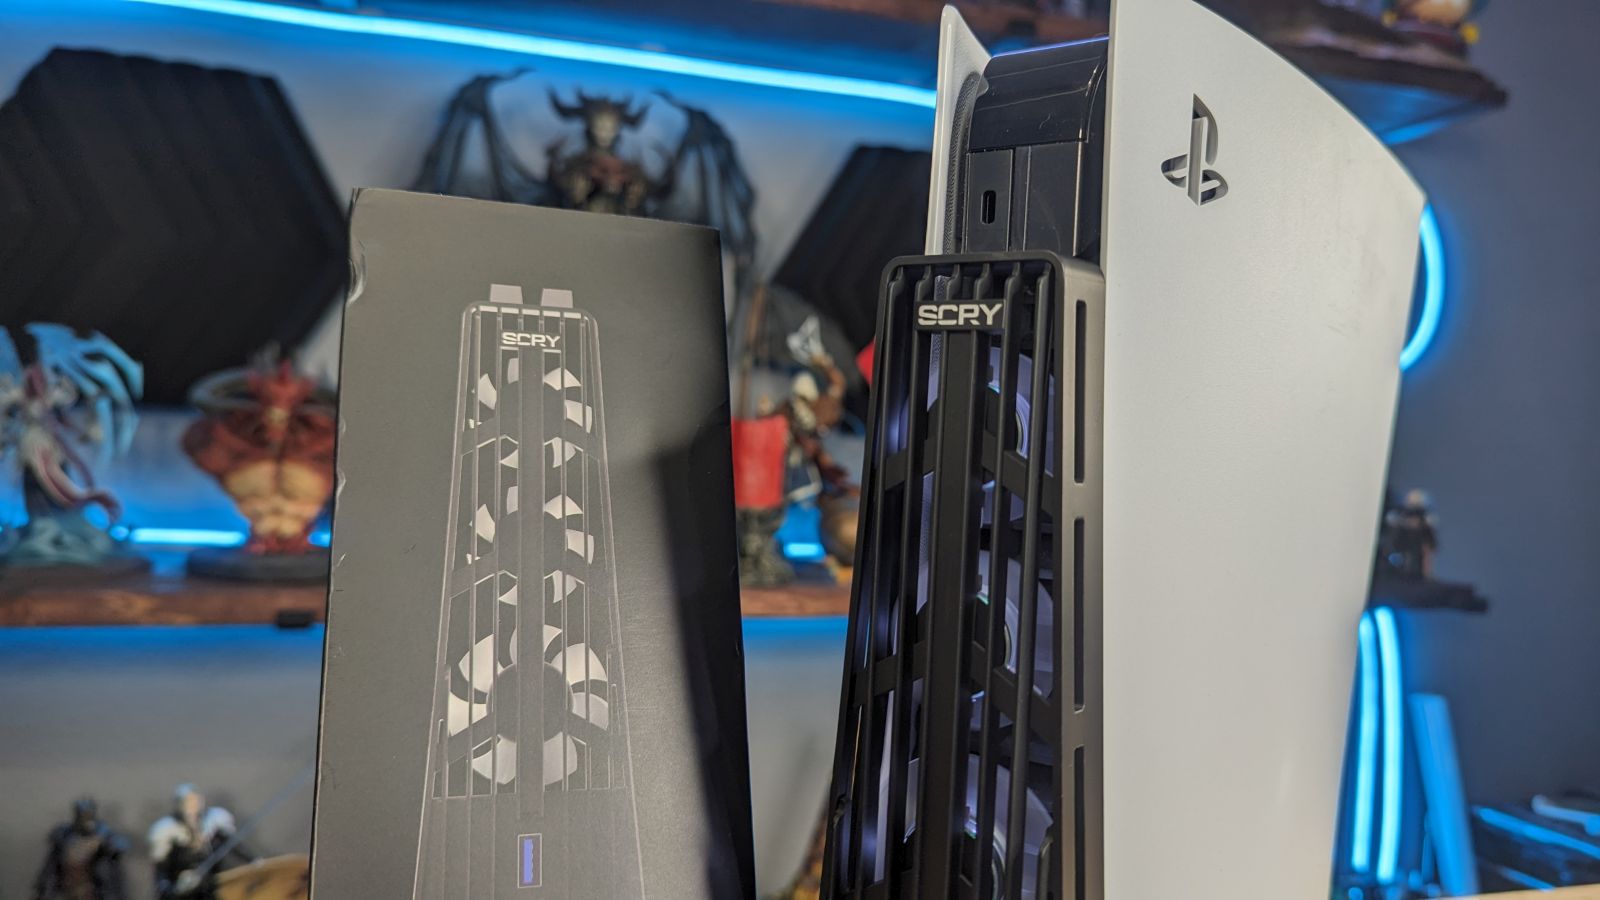 The PS5 Looks Pretty Cool : r/starcitizen